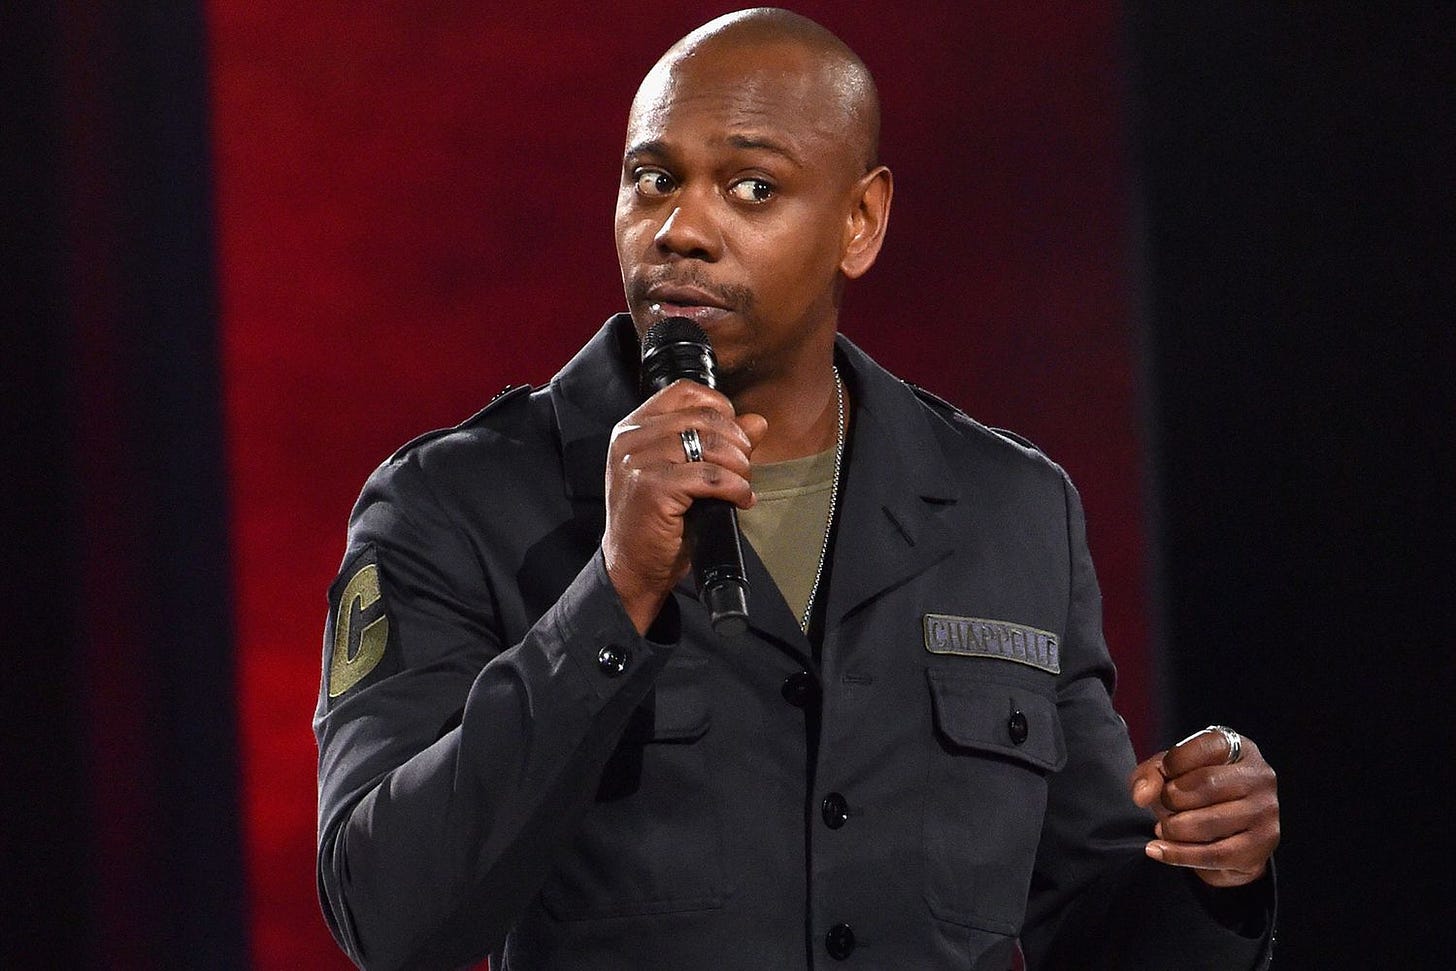 Dave Chappelle producing new series of comedy specials for Netflix